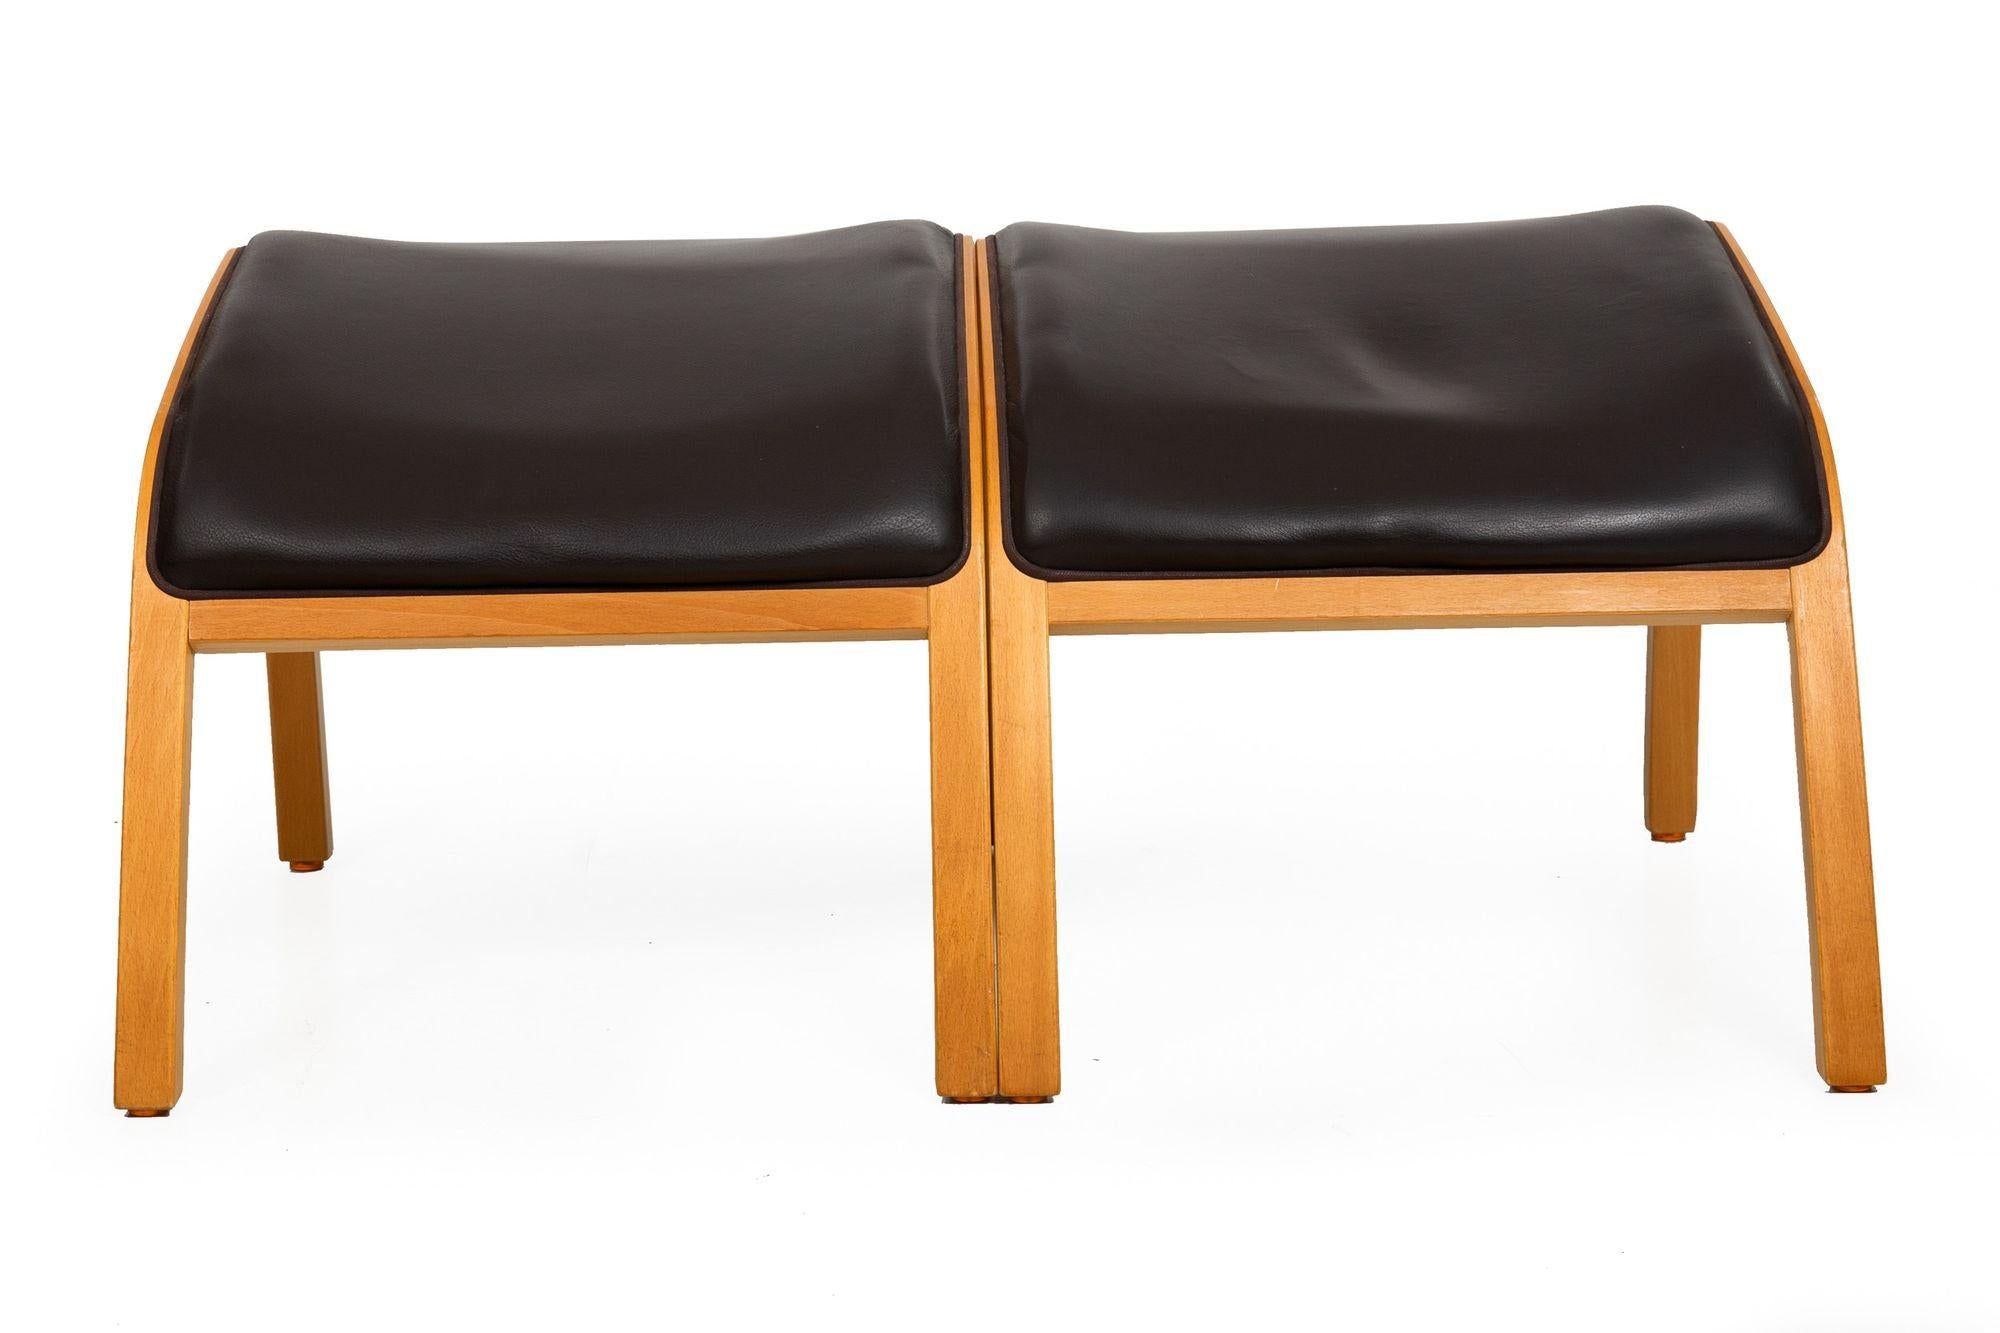 Scandinavian Modern Bentwood Leather Arm Chairs with Ottomans - A Pair For Sale 15